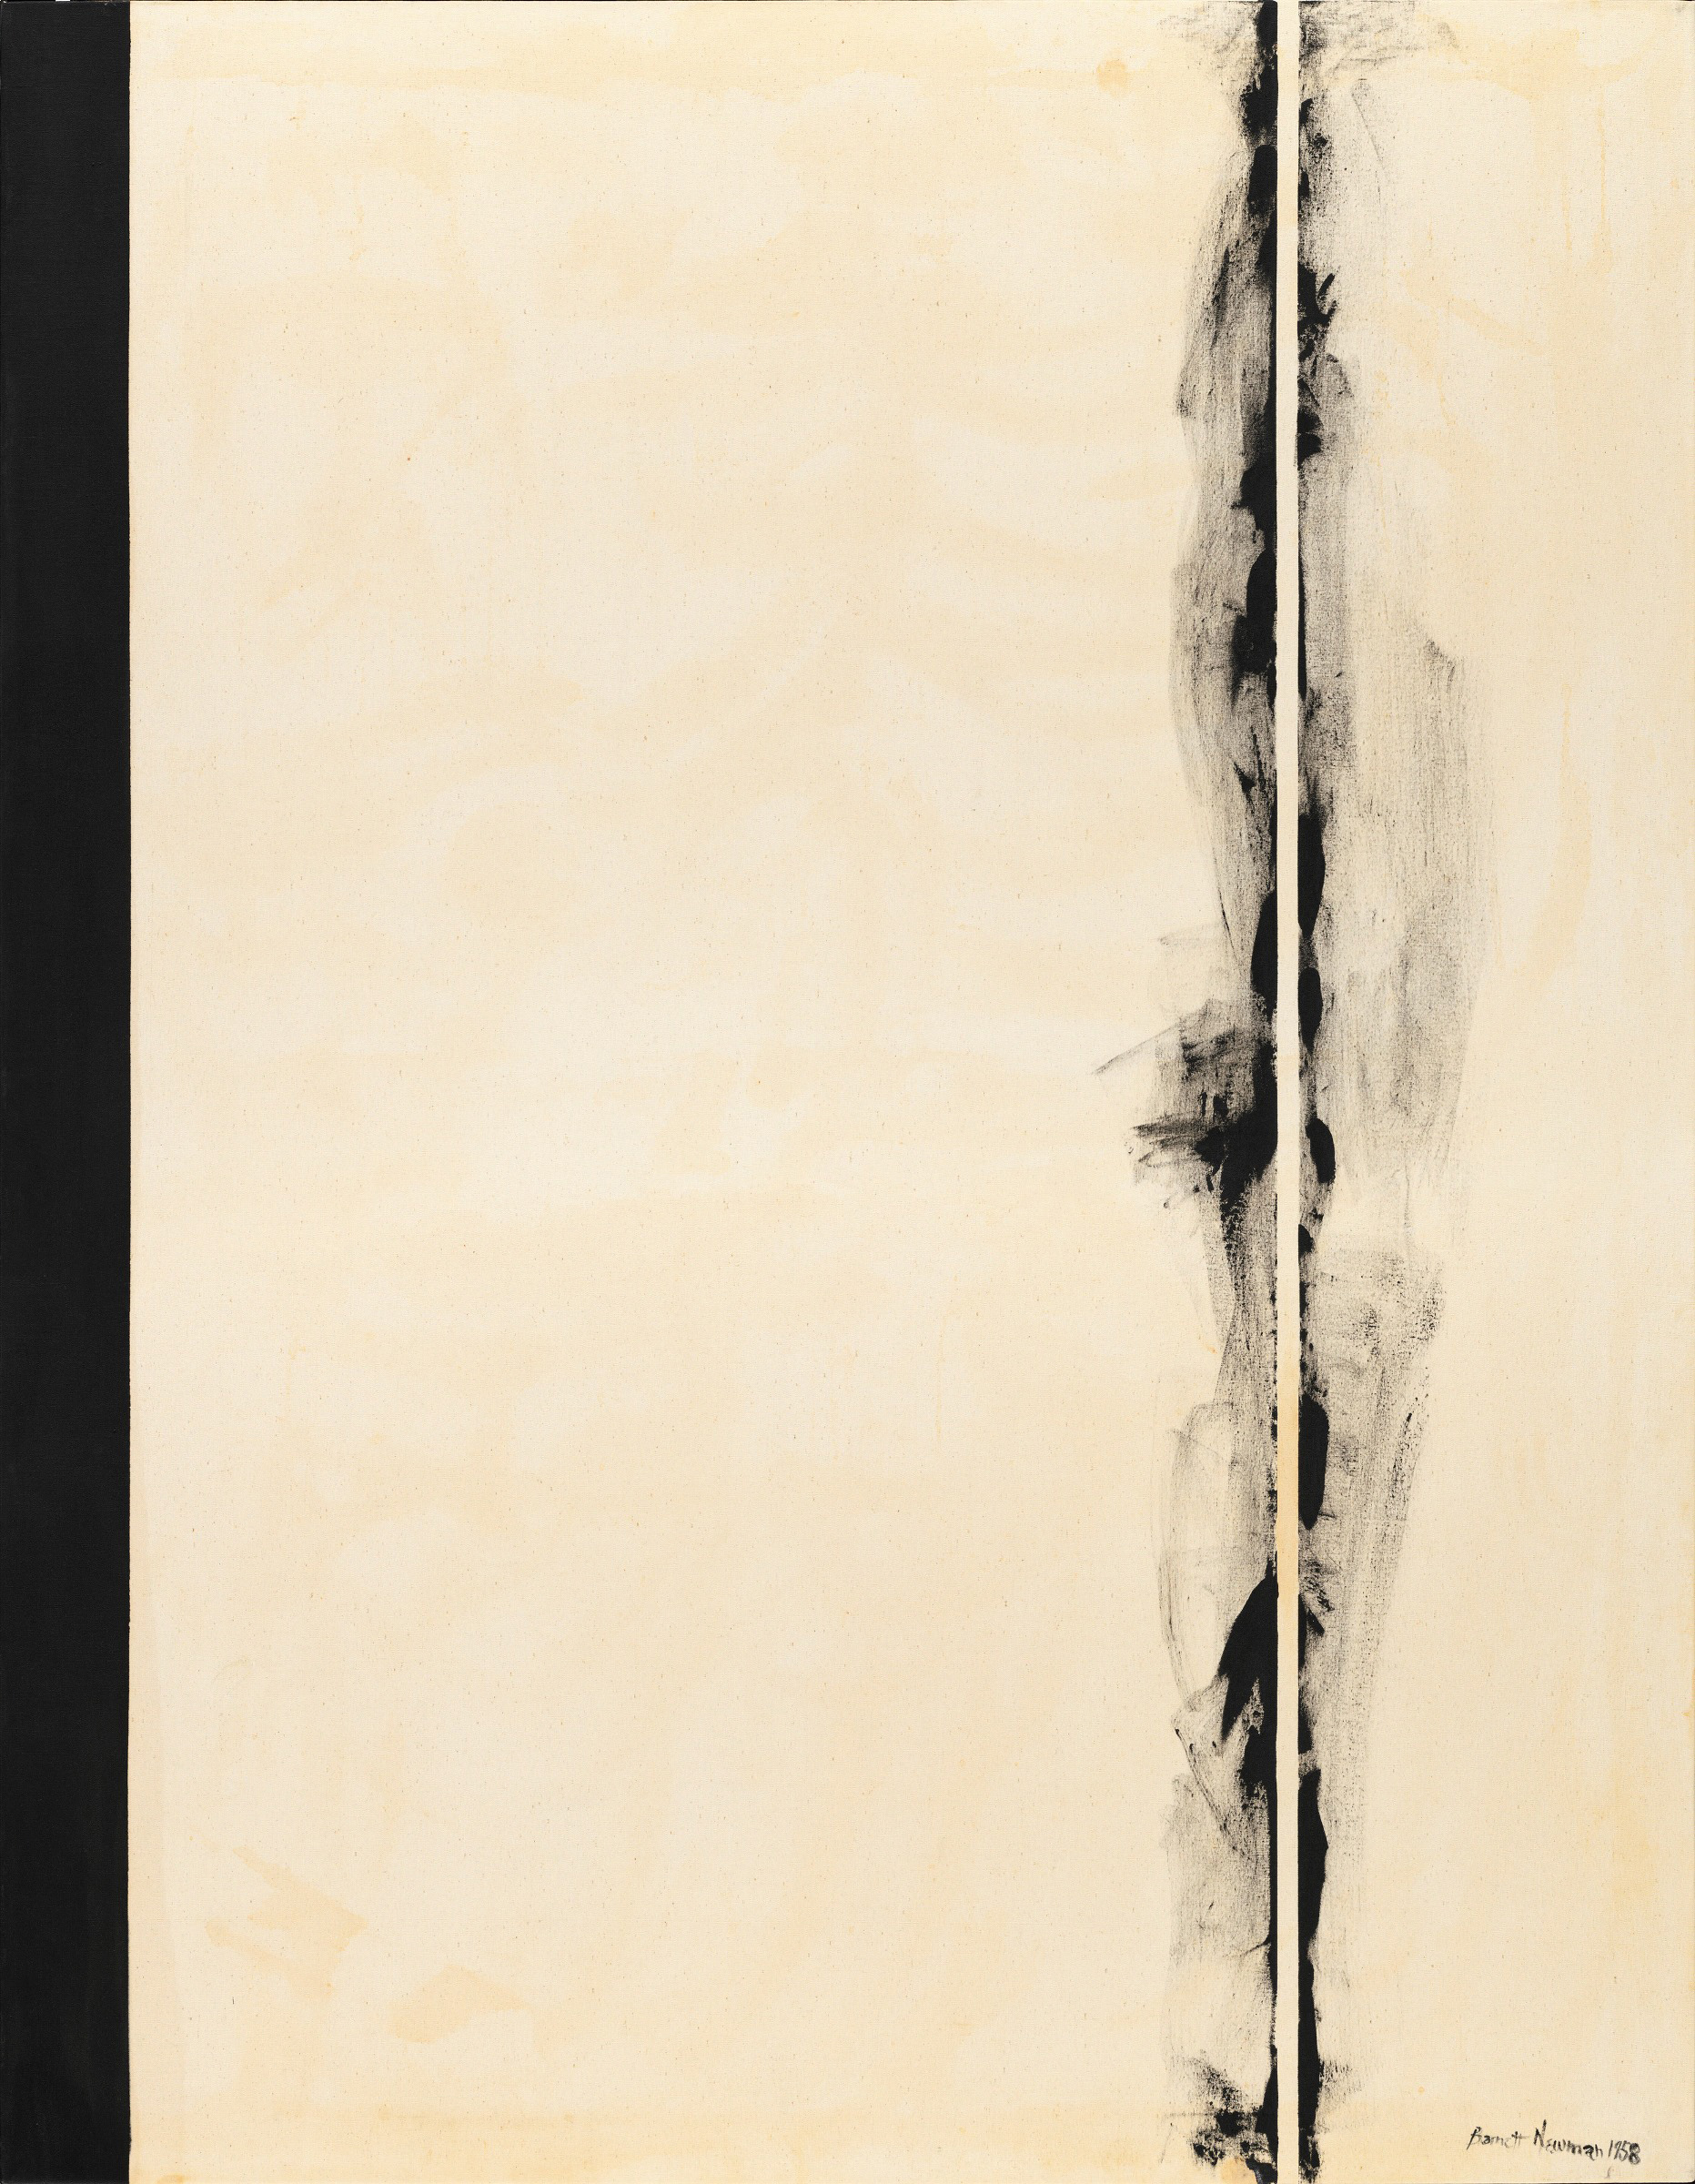 First Station (1958) (from the series Stations of the Cross, 1958-66) by Barnett Newman. As featured in our book Abstract Expressionism